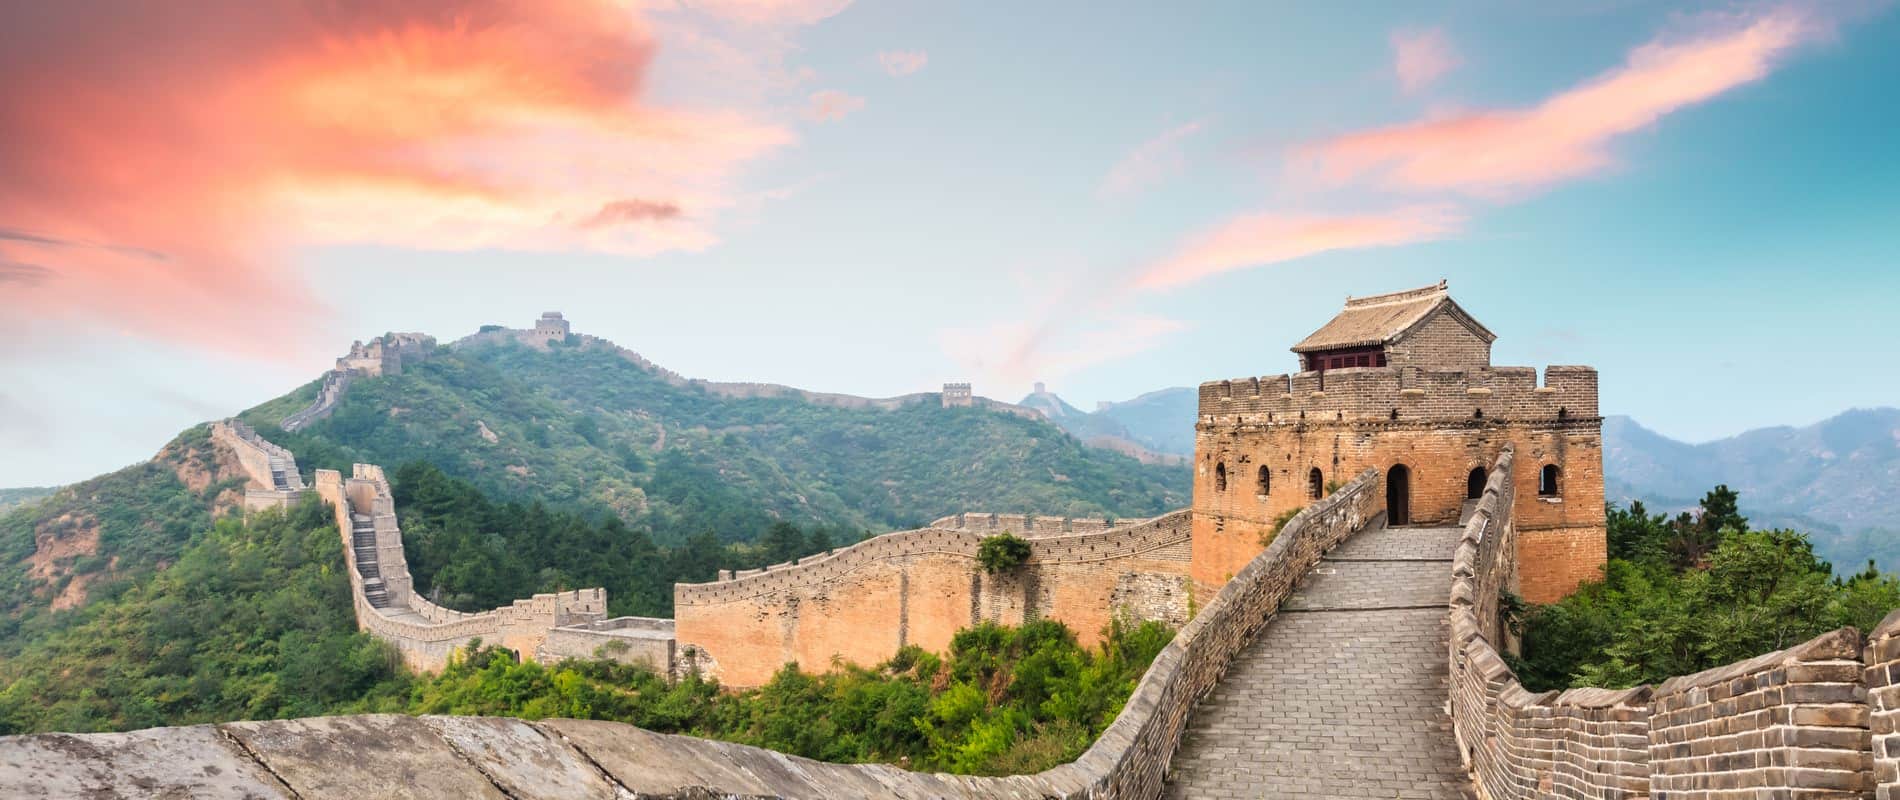 Aerial view of the Great Wall of China amidst blue and pastel skies